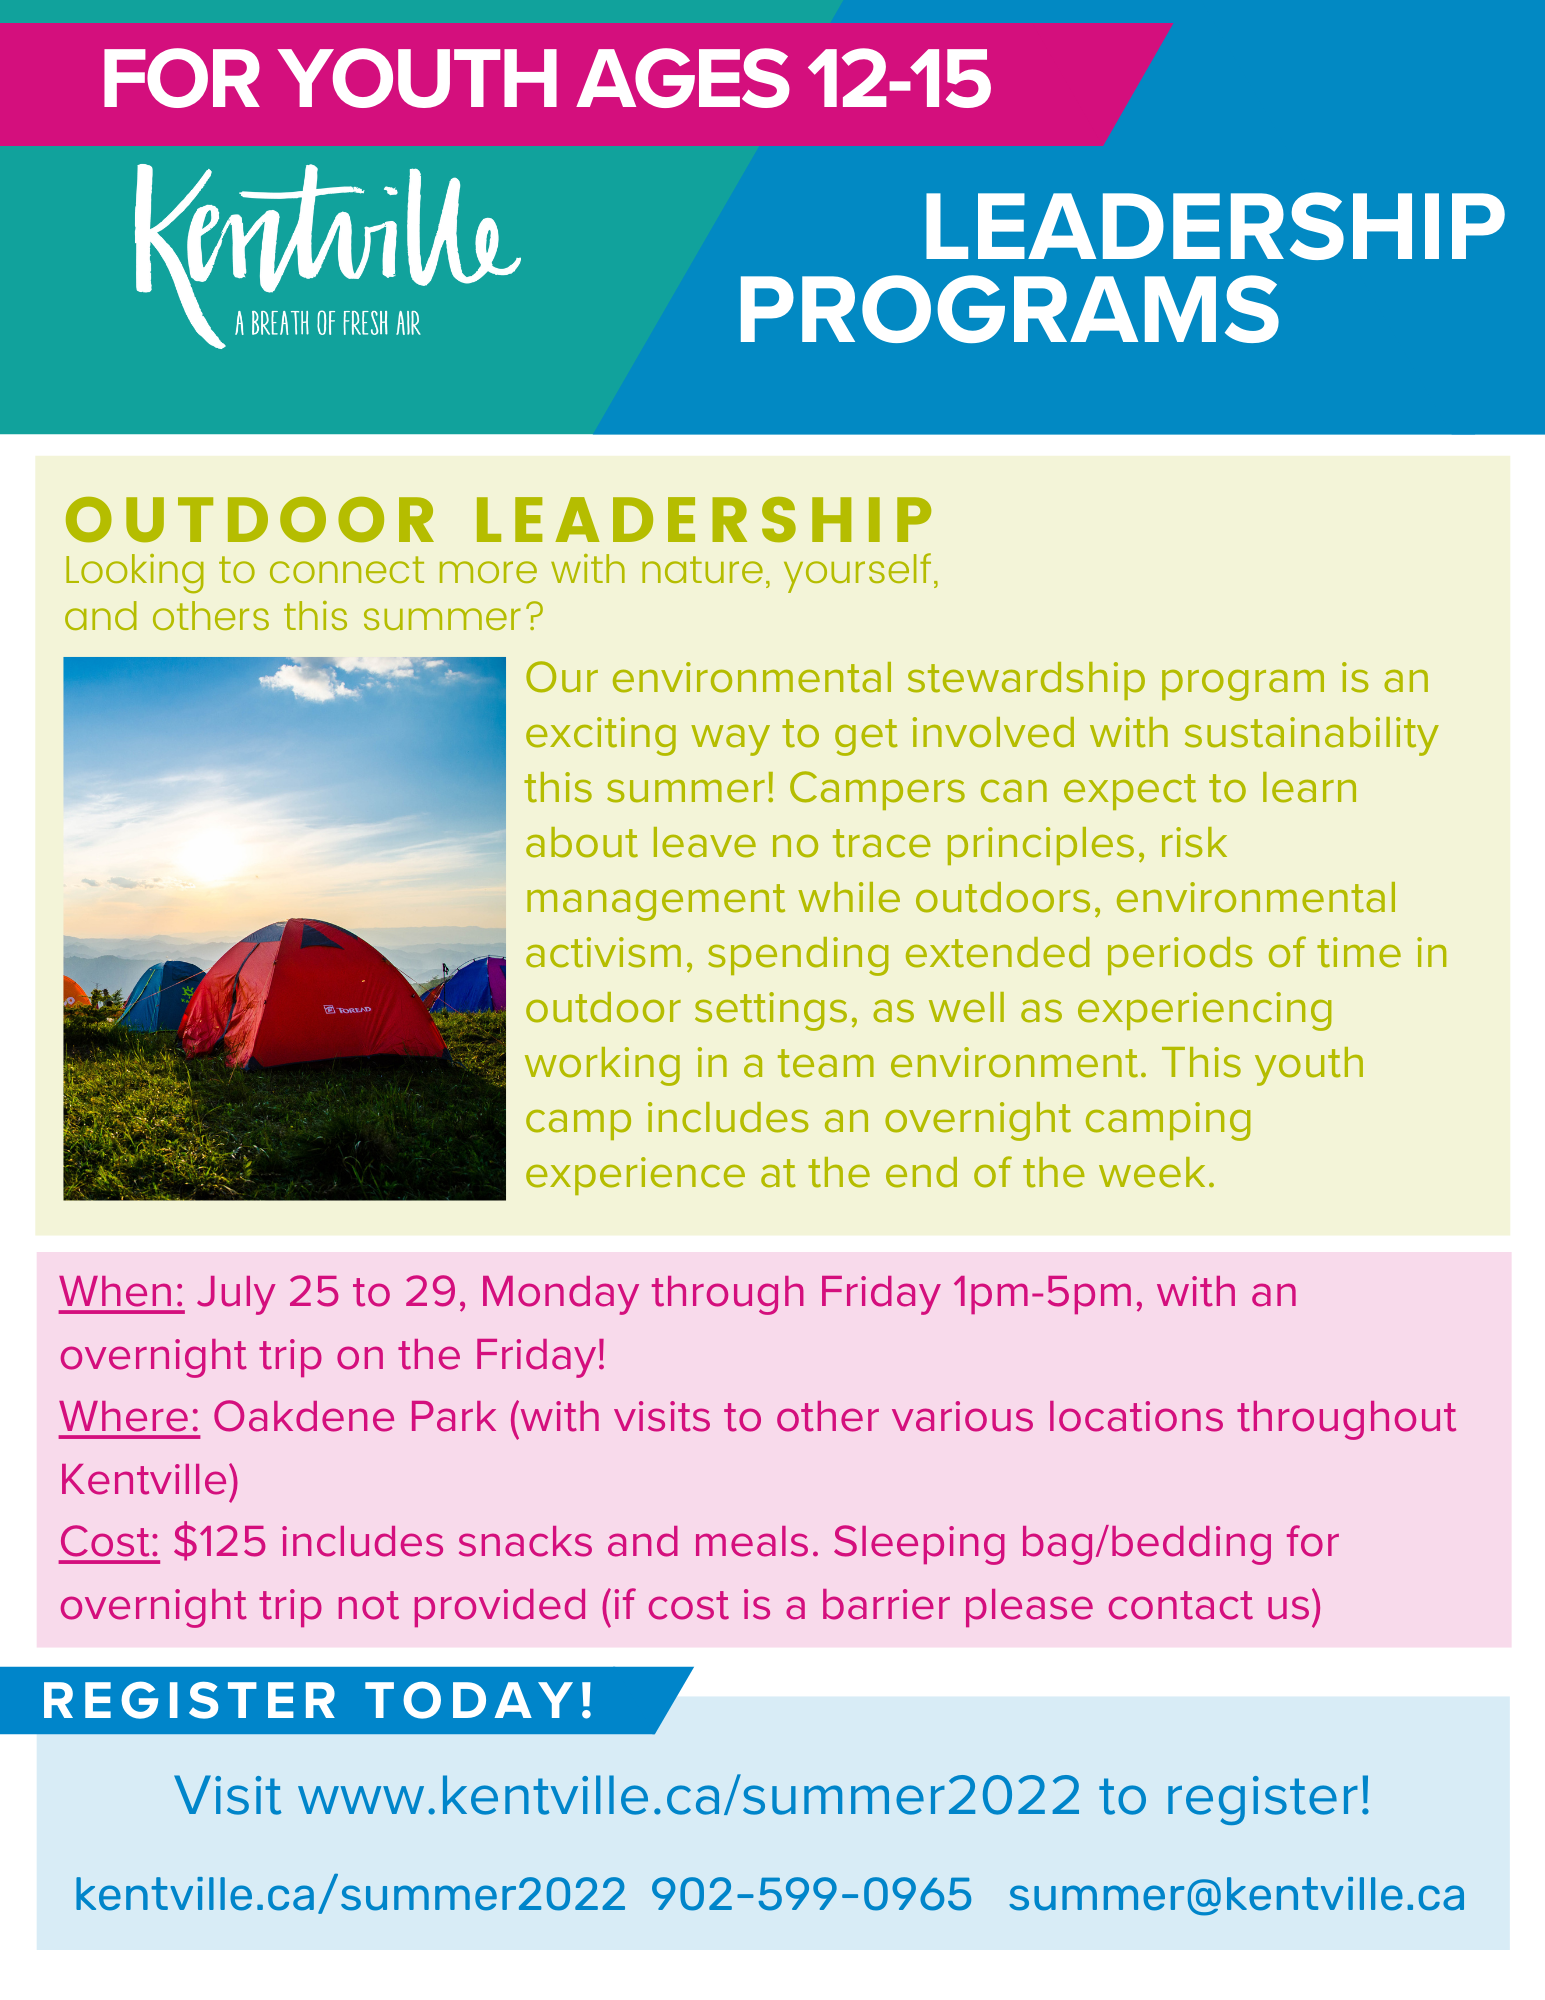 Poster outlining the Youth Outdoor Leadership Program poster. For more information, please call 902-599-0965 or email summer@kentville.ca